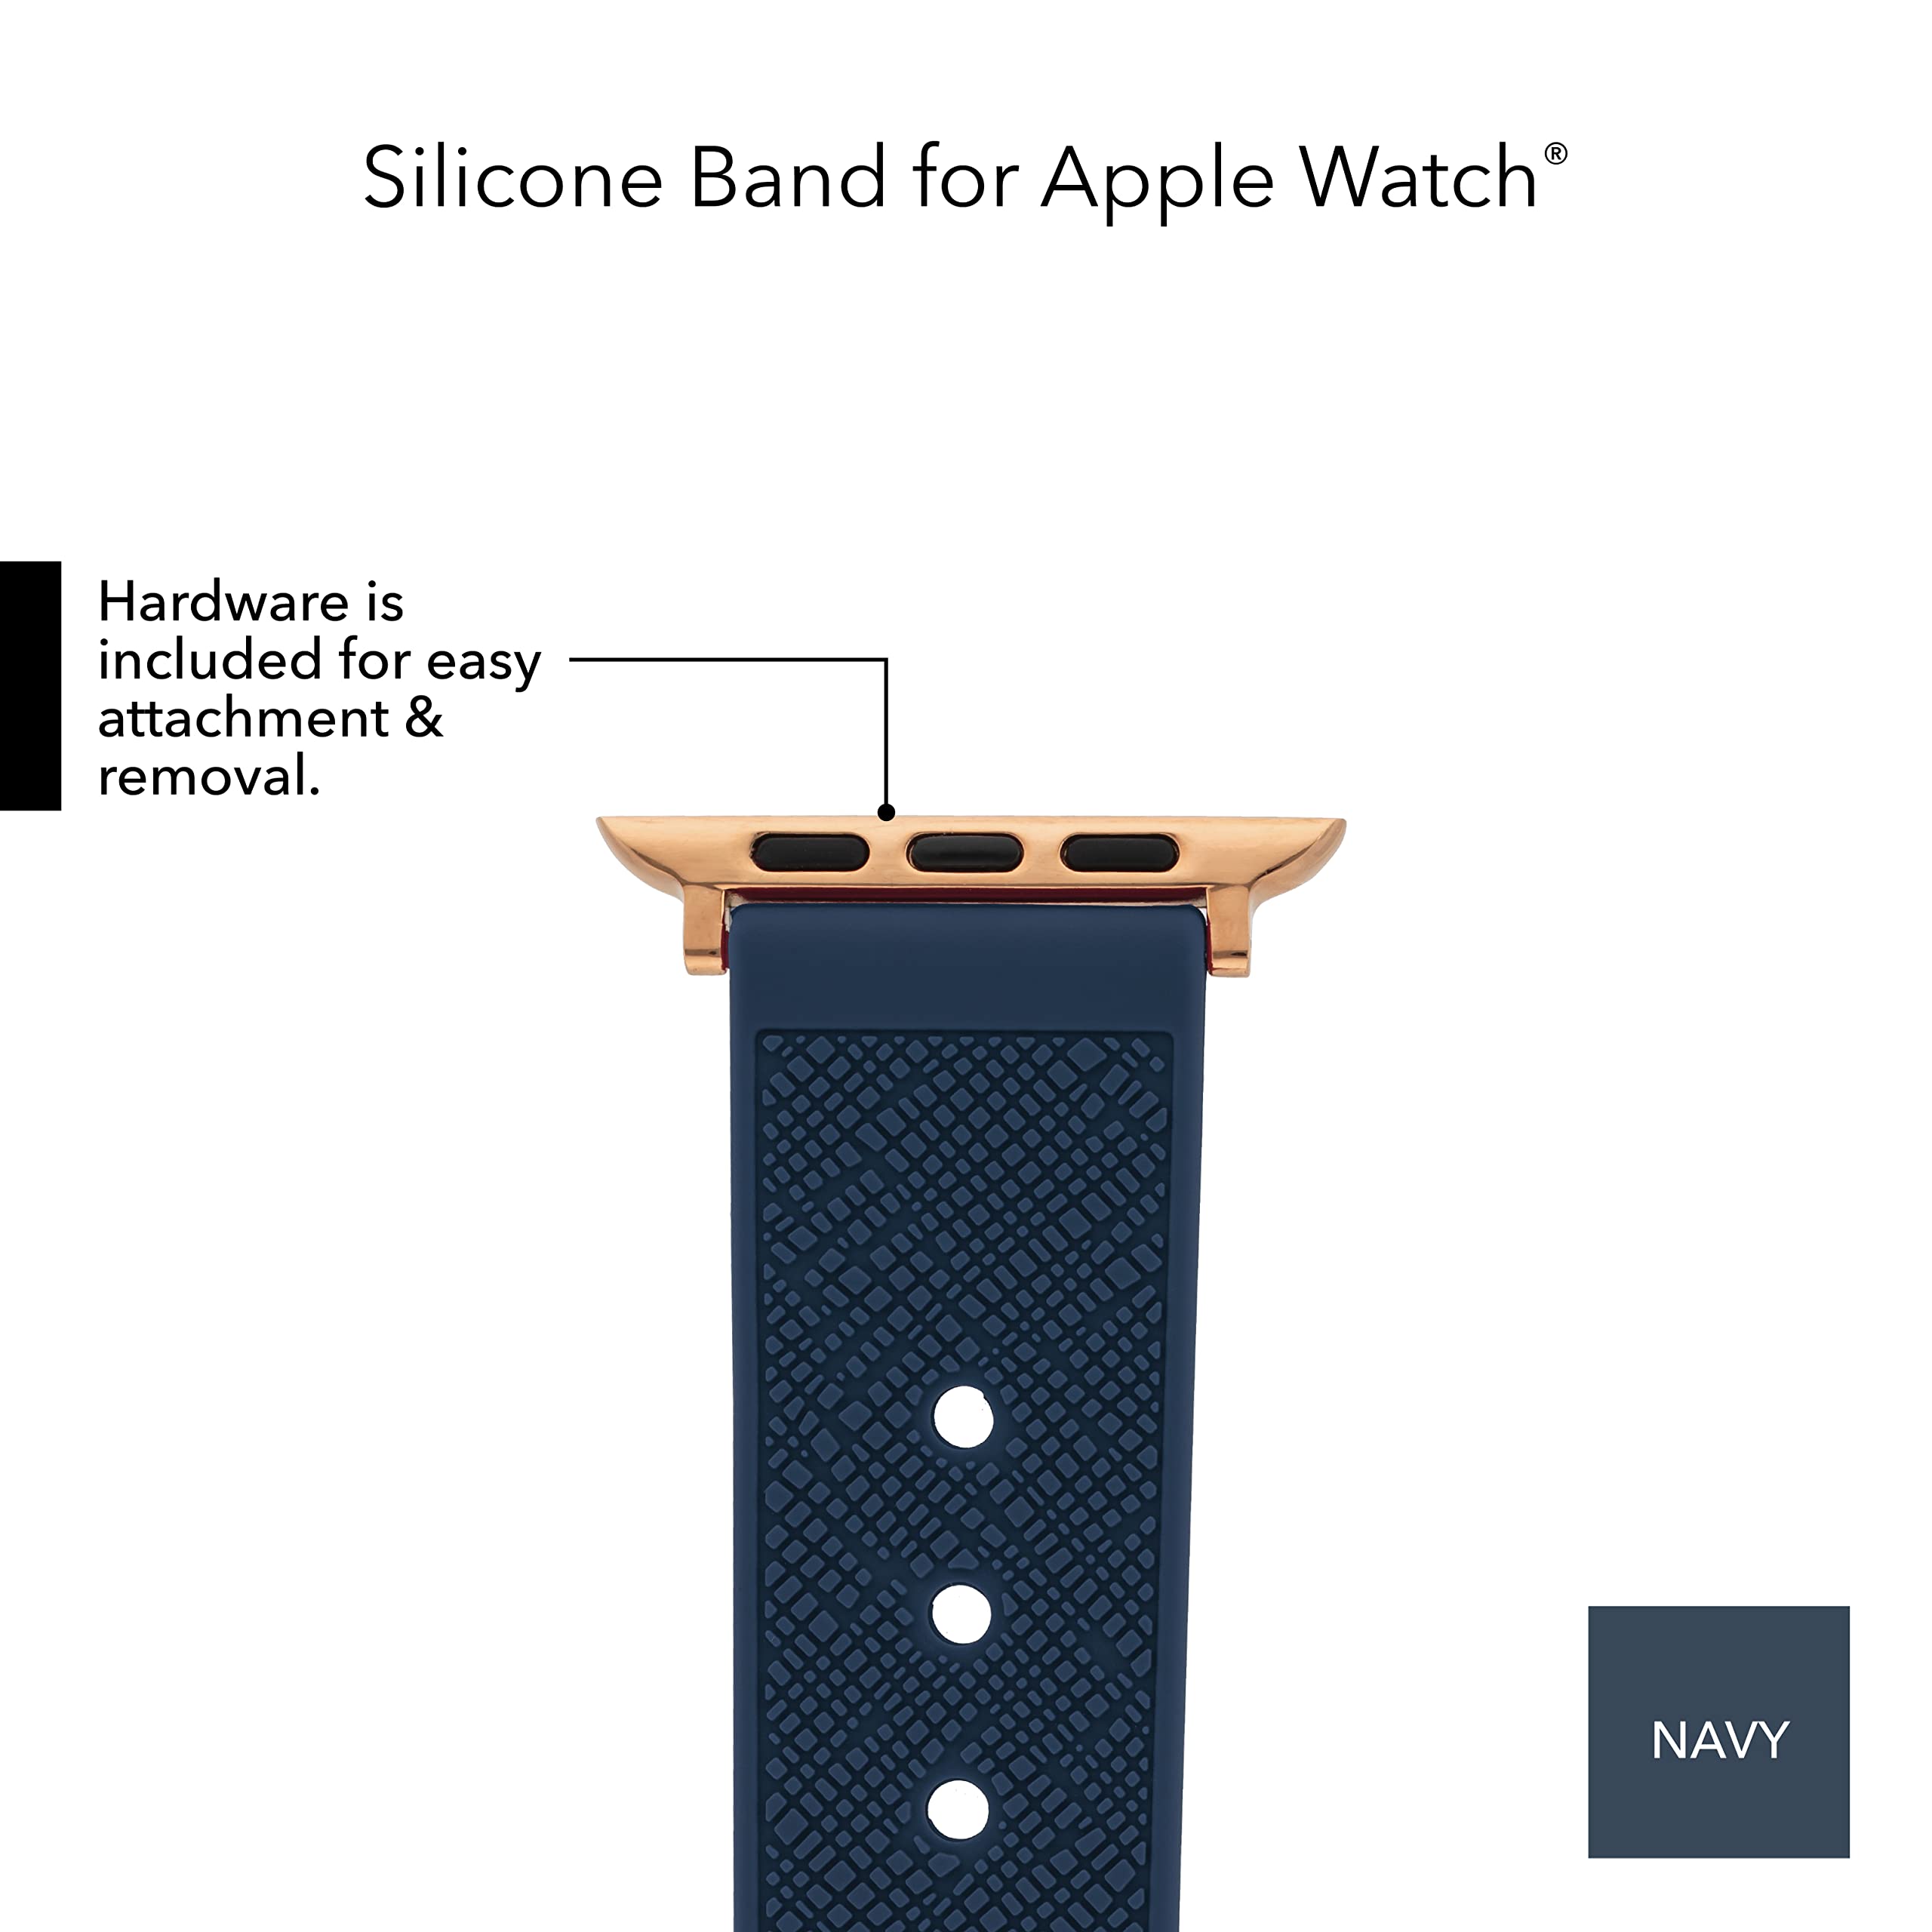 Anne Klein Silicone Fashion Band for Apple Watch Secure, Adjustable, Apple Watch Band Replacement, Fits Most Wrists